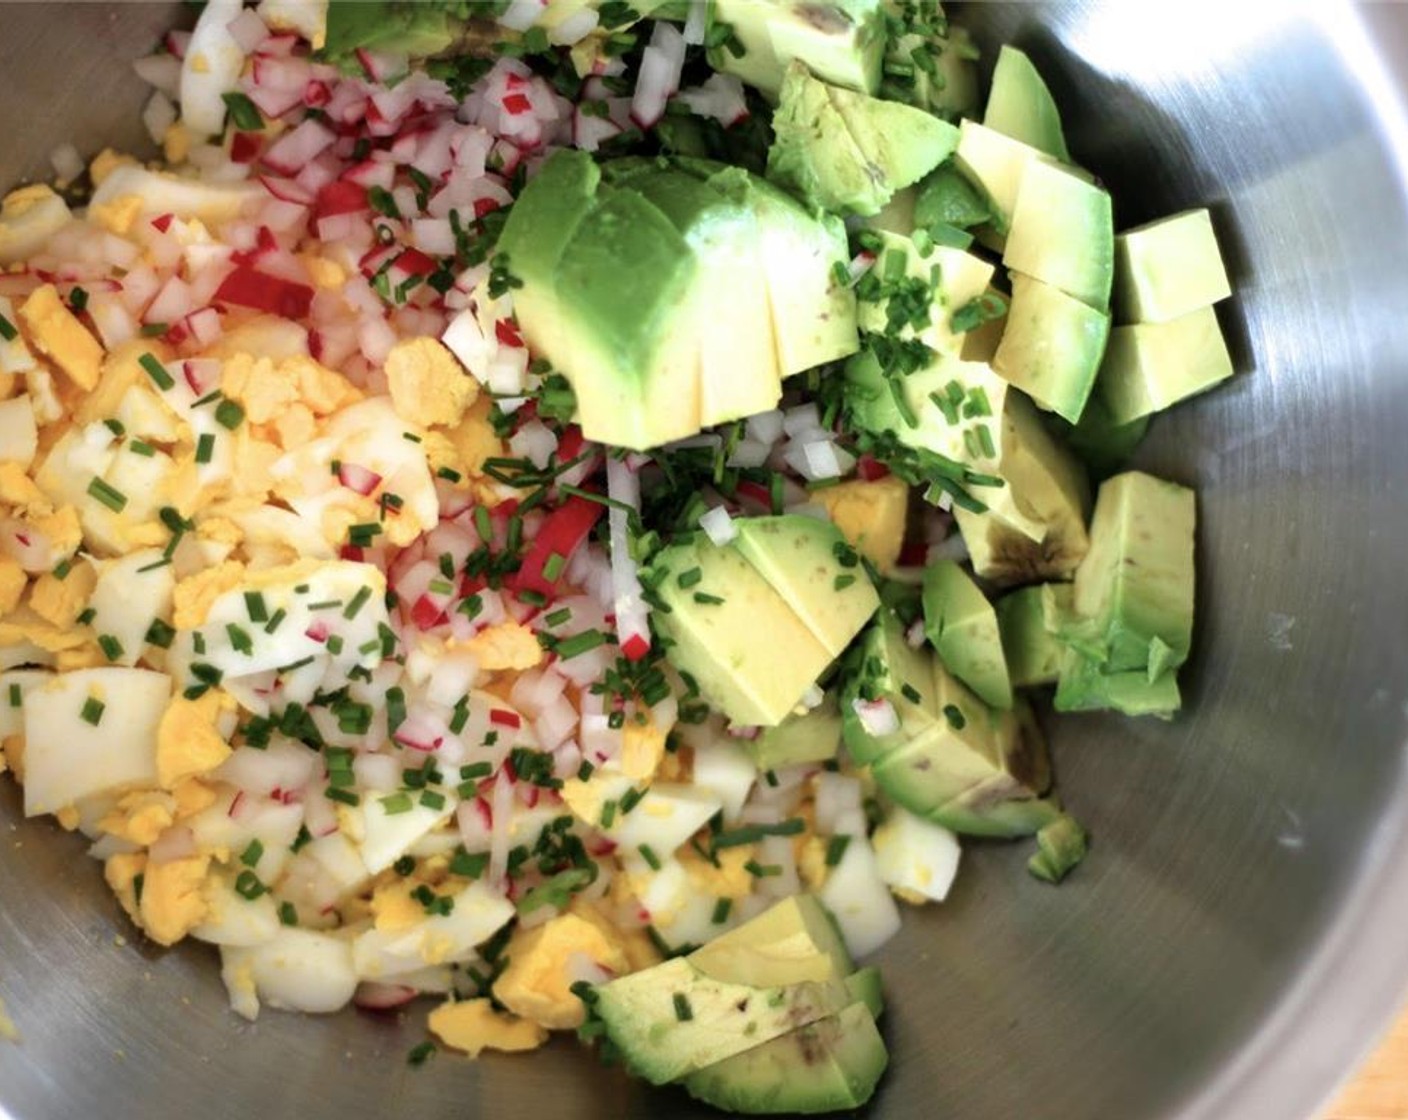 step 2 In a bowl, mix the eggs, Fennel Bulb (1/4)m Radish (1/4 cup), Fresh Chives (1/4 cup), and Avocado (1).